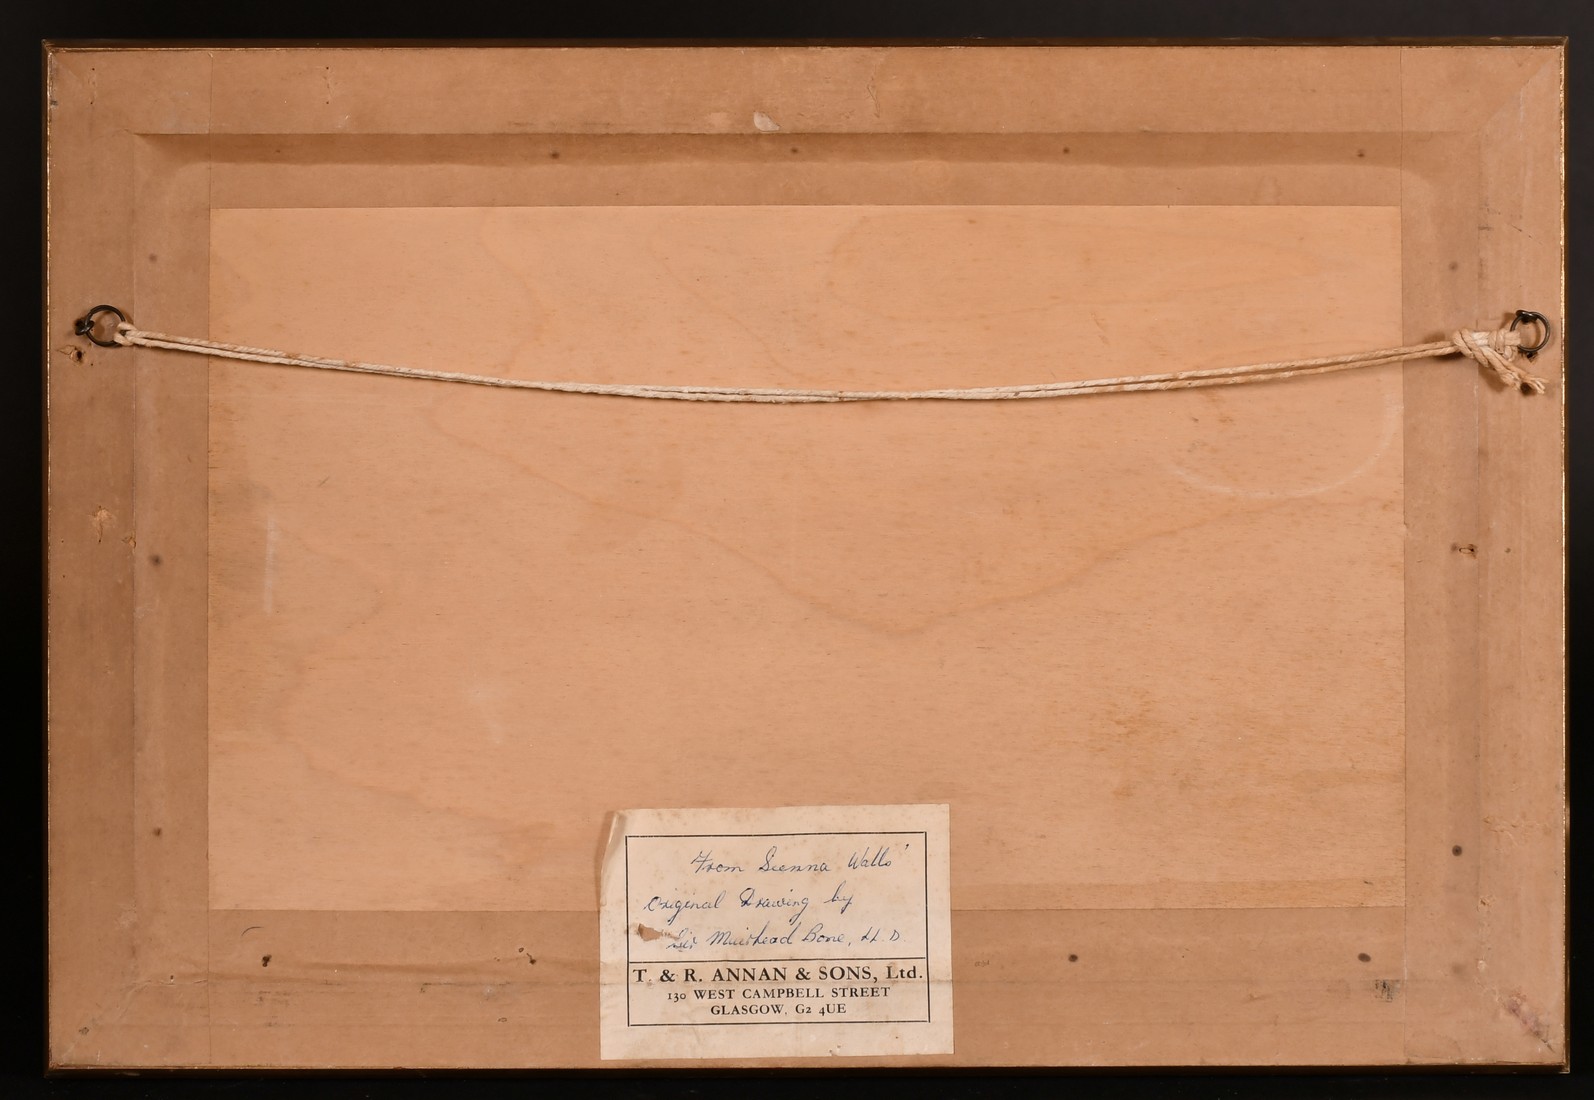 Muirhead Bone, 'From Sienna Walls', pencil and wash, inscribed, 4.5" x 7", Provenance: T & R Annan & - Image 4 of 4